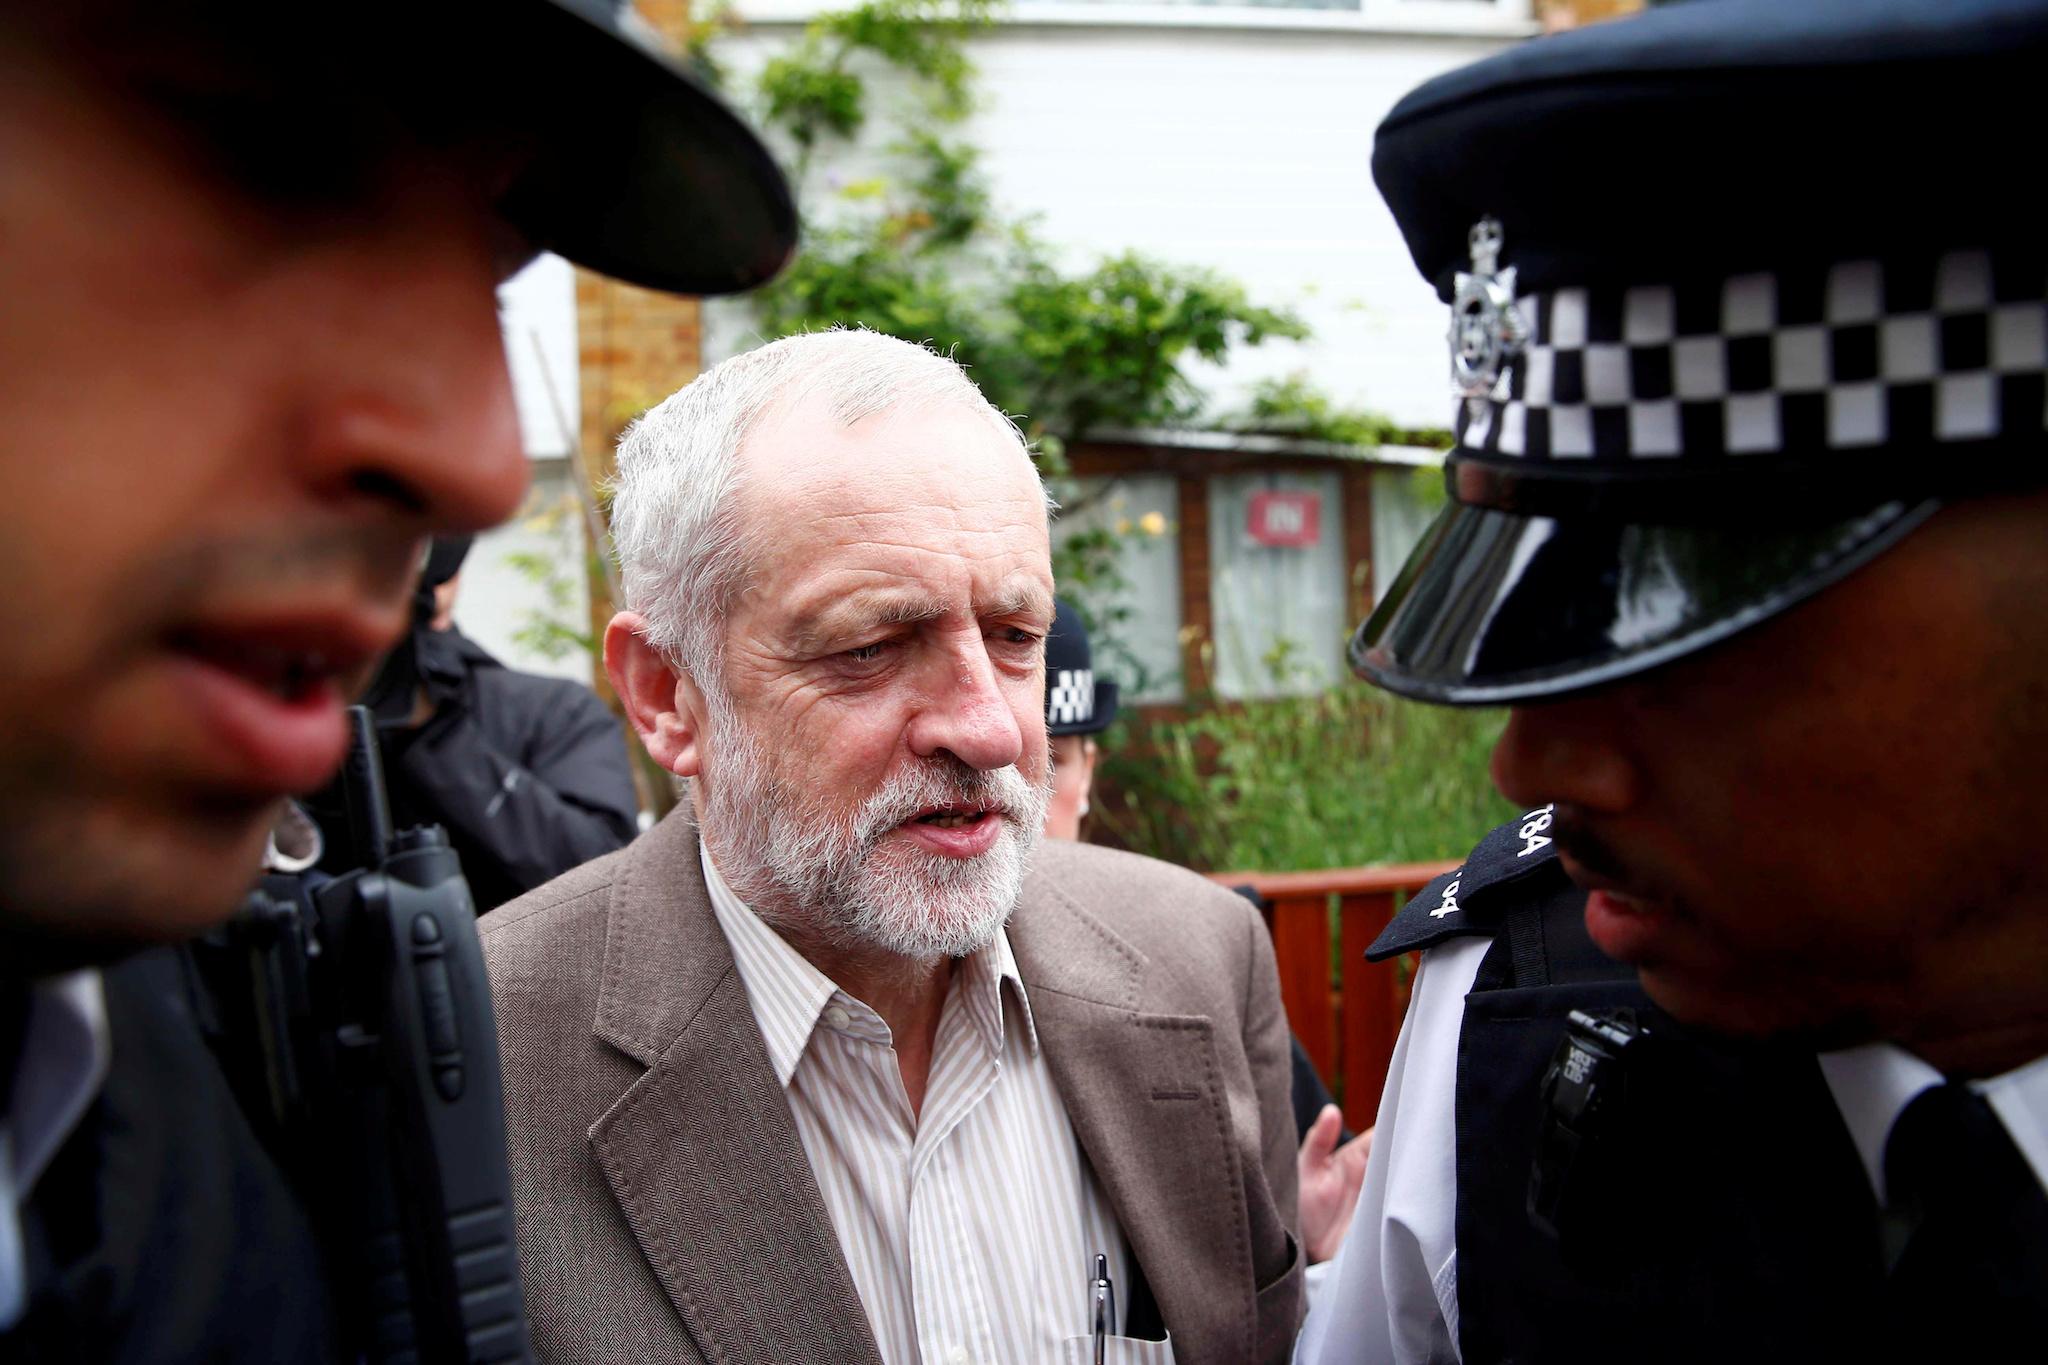 The leader of Britain's opposition Labour party, Jeremy Corbyn, leaves his home in London, Britain June 27, 2016